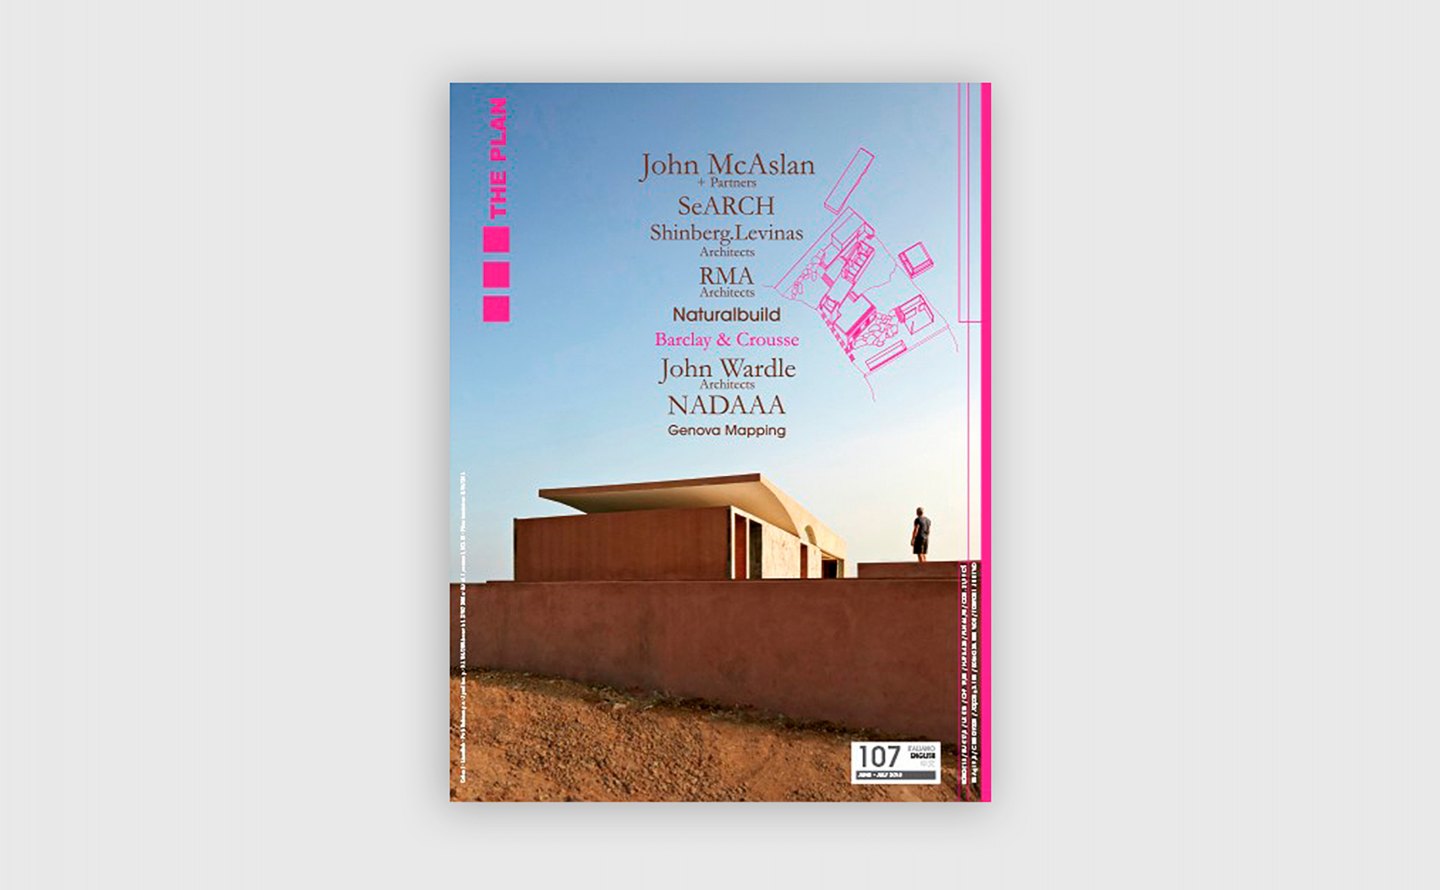 Msheireb Museums featured in The Plan magazine